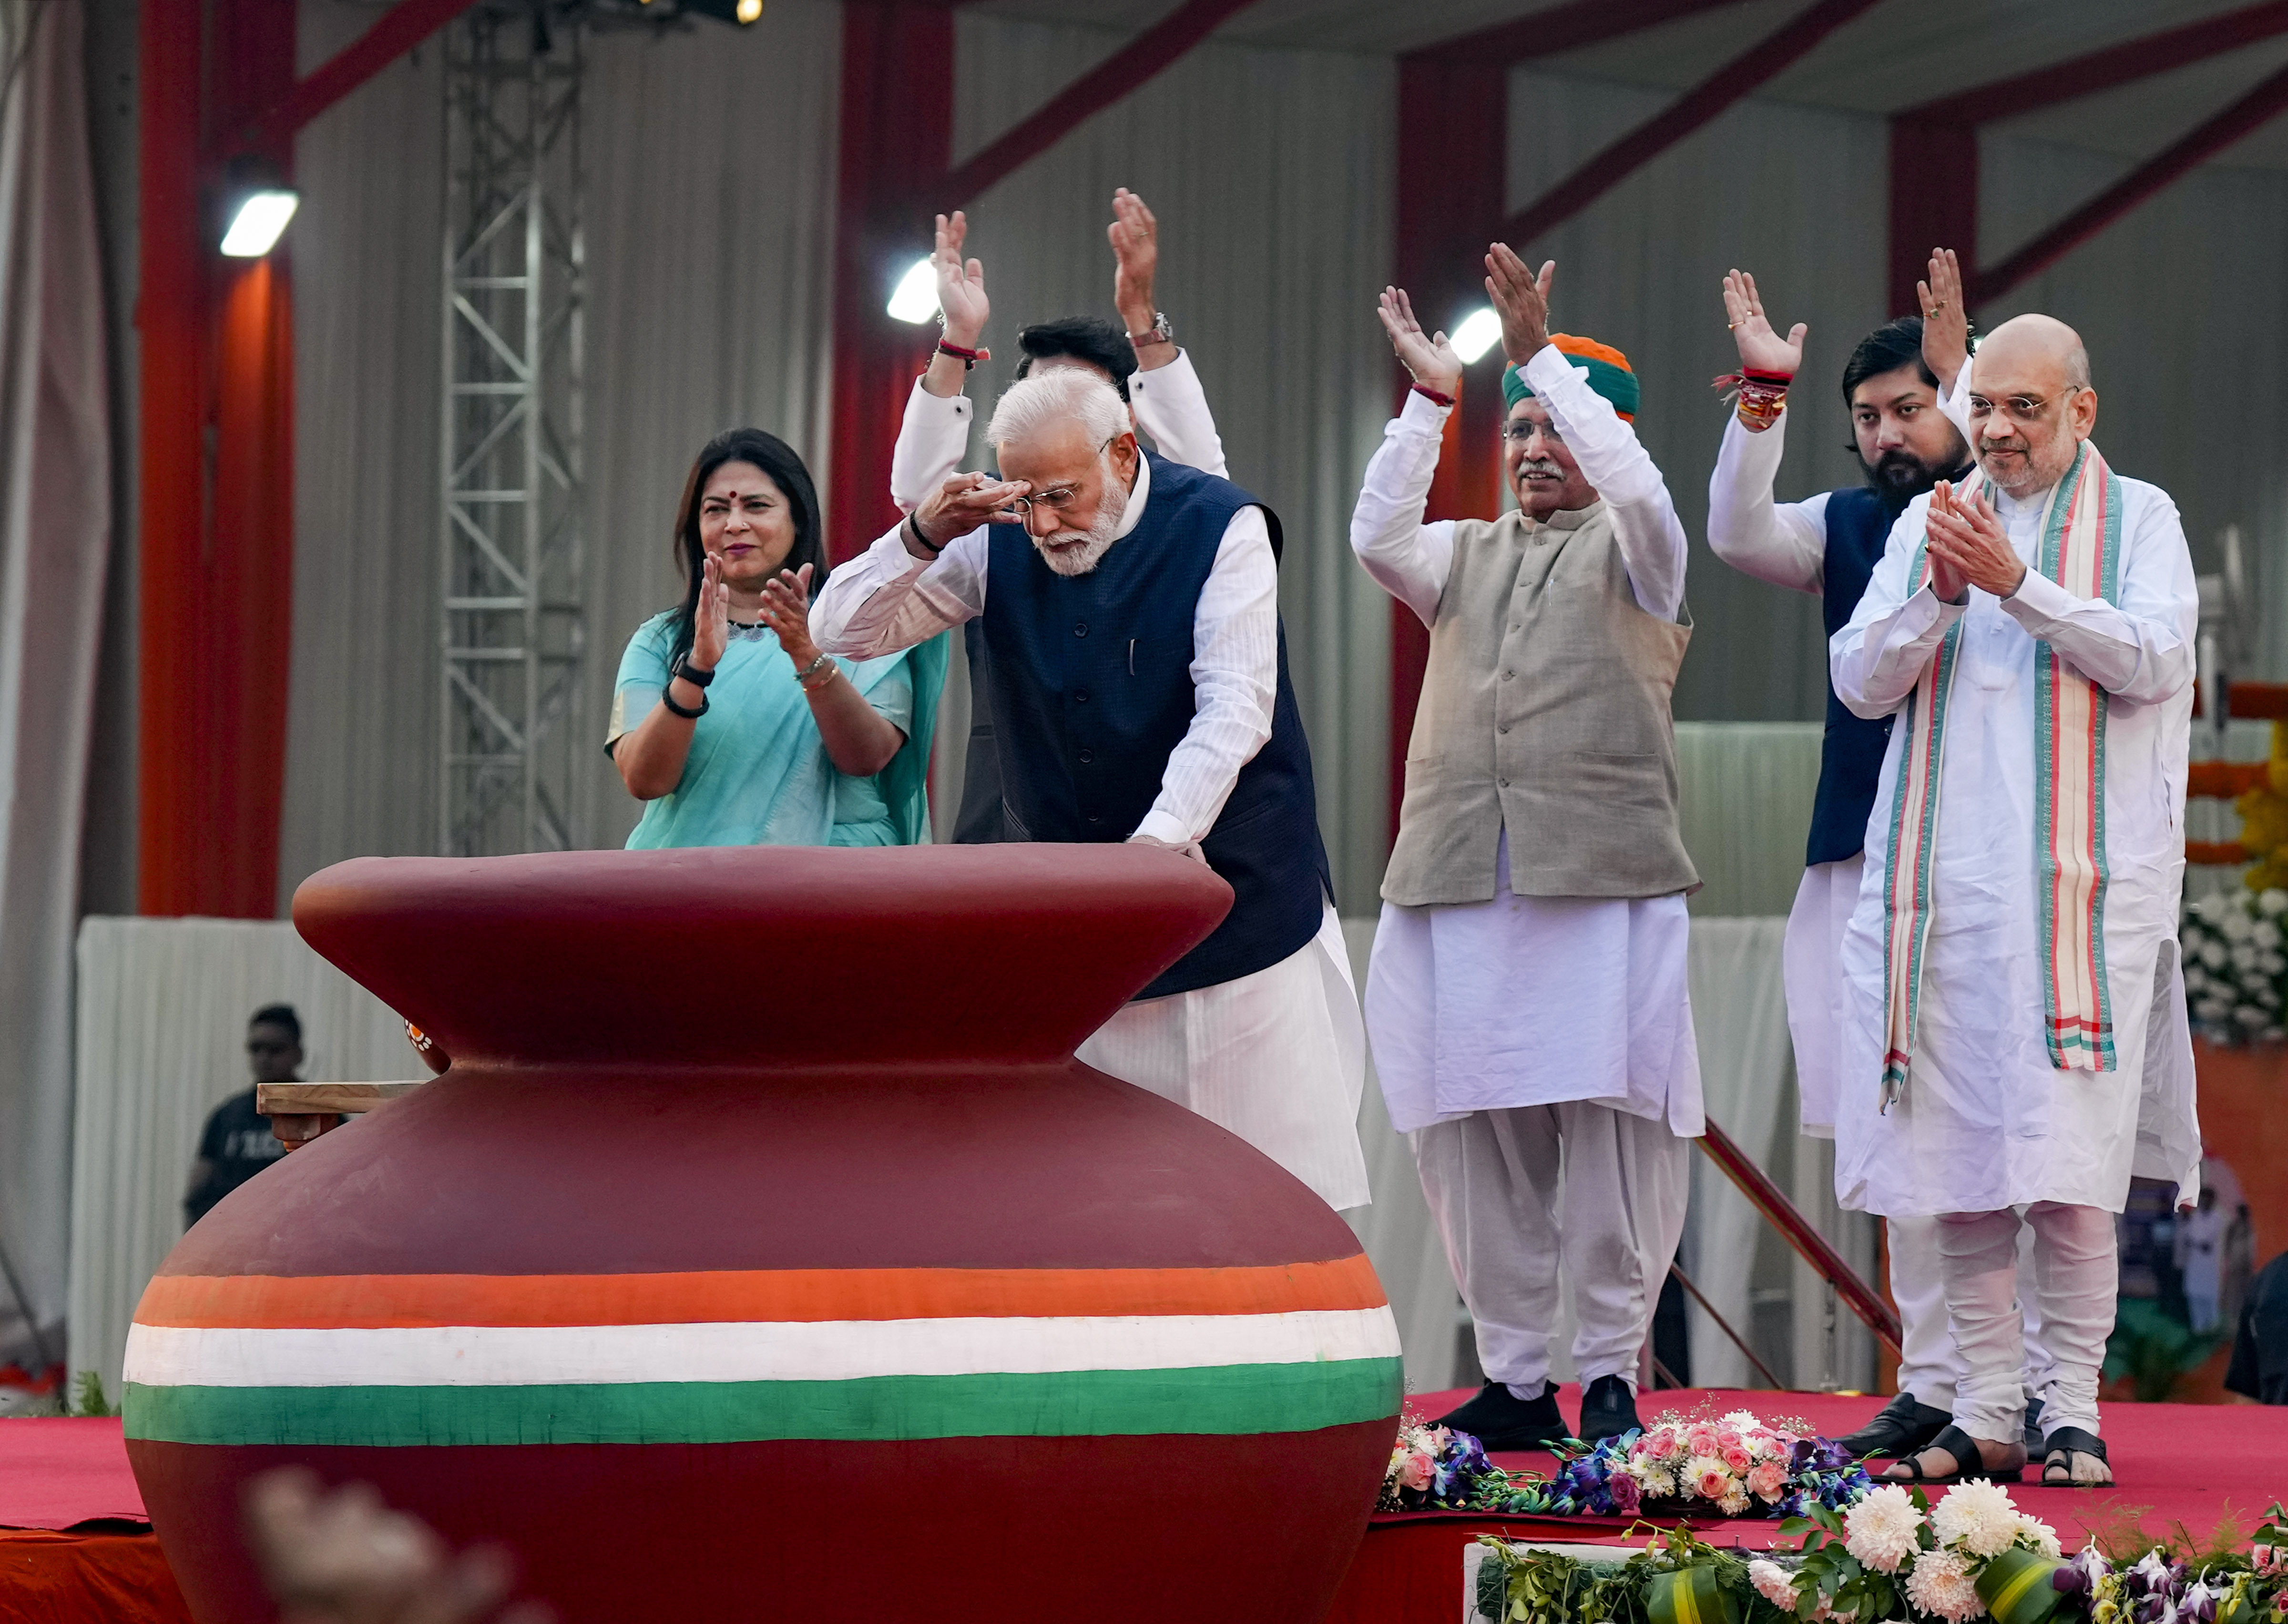 Prime Minister Narendra Modi during an event marking the culmination of the 'Meri Maati Mera Desh' campaign, in New Delhi, on Tuesday. Union Ministers Amit Shah, Arjun Ram Meghwal, Meenakashi Lekhi and Nisith Pramanik are also seen. -PTI